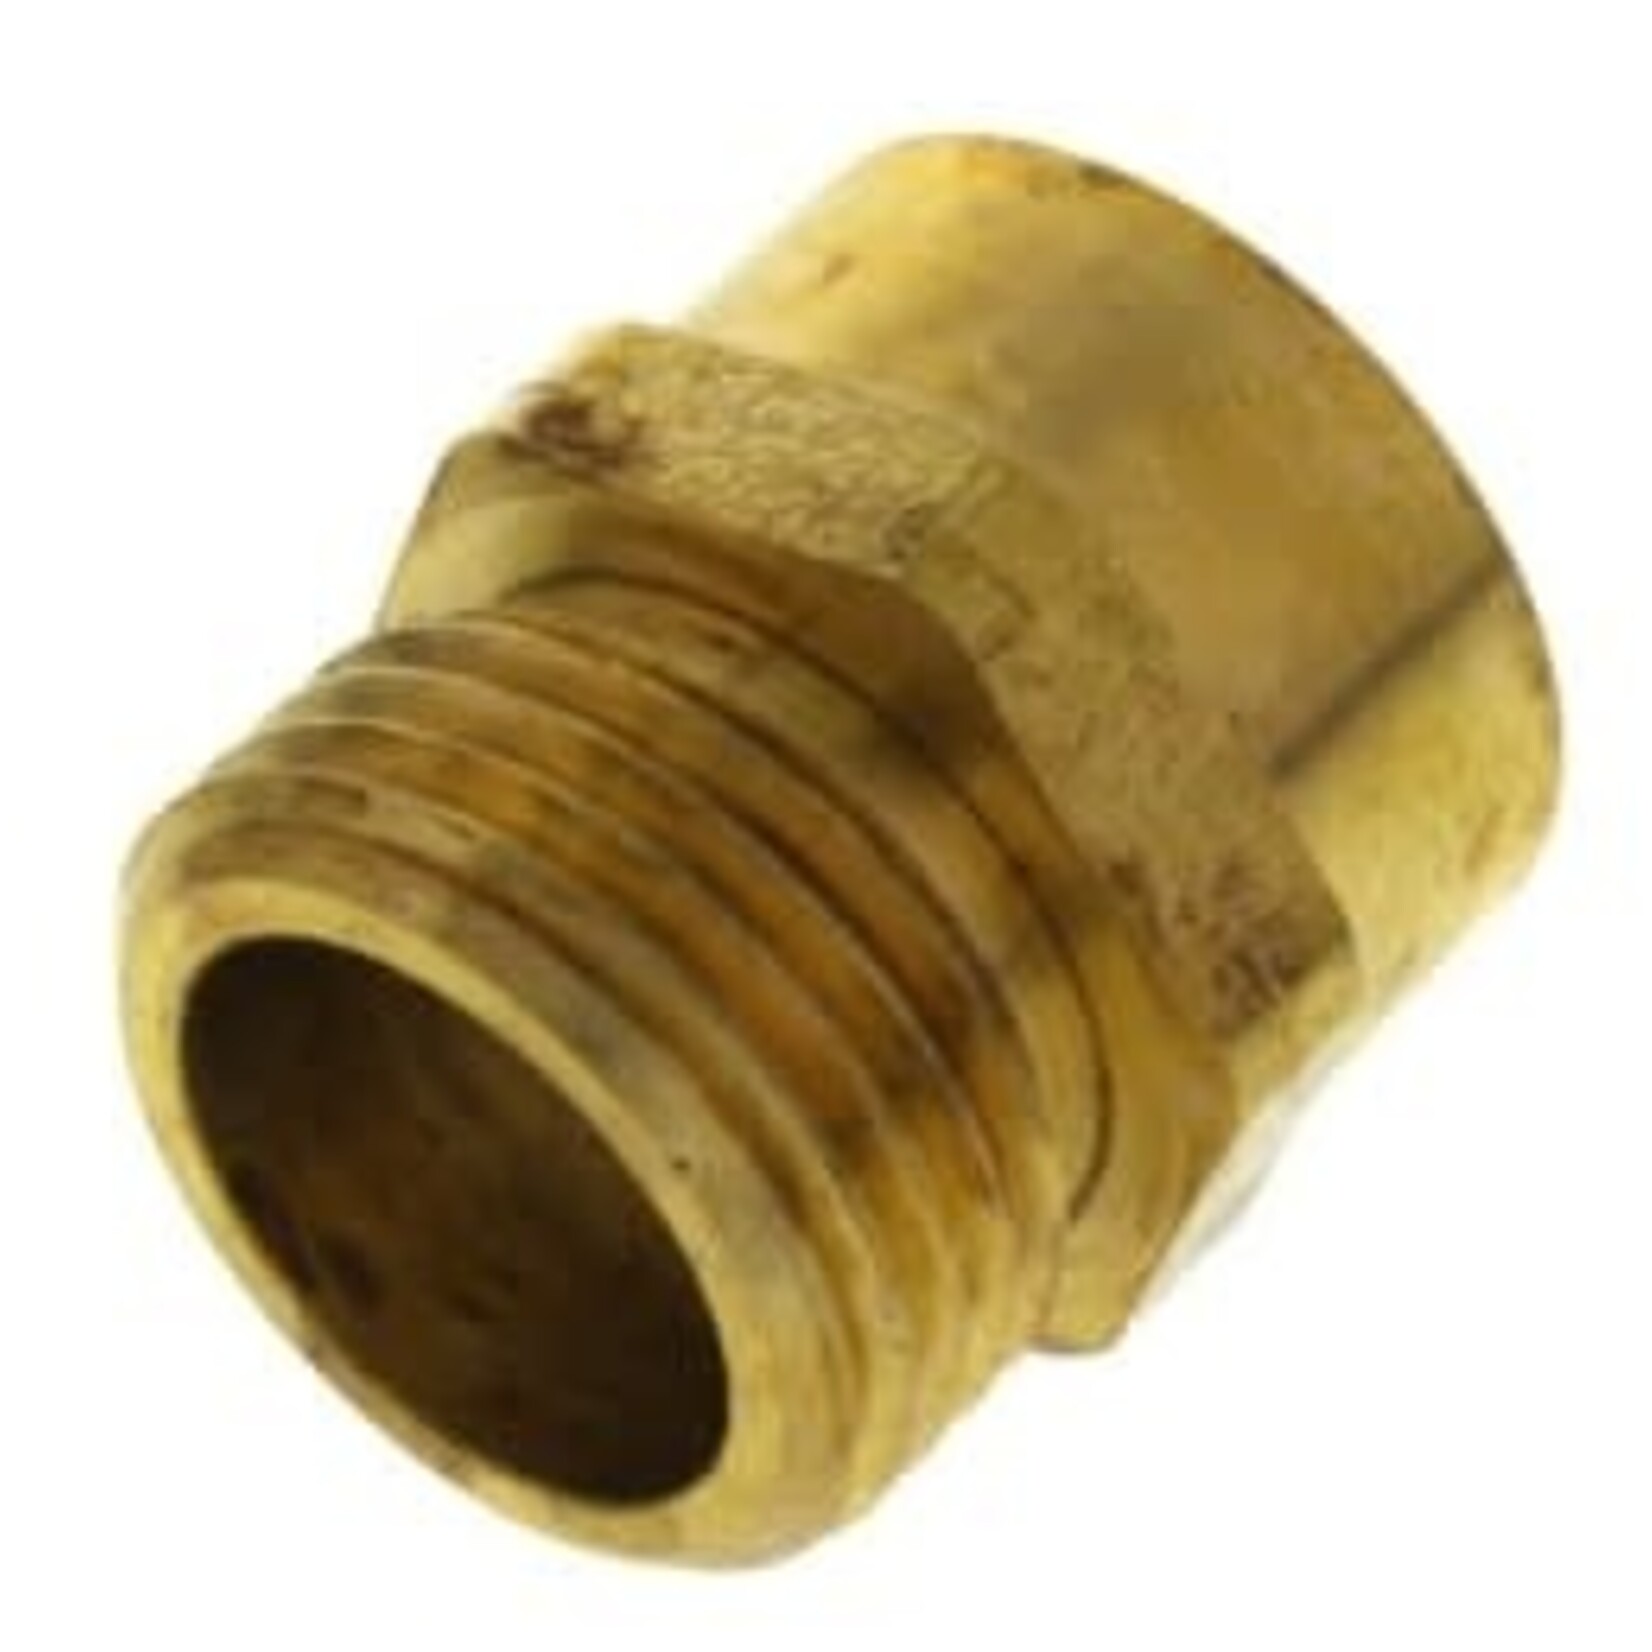 SIOUX CHIEF 1/2 IN MALE X 1/2 IN FEMALE PIPE THREAD BRASS GARDEN HOSE ADAPTER